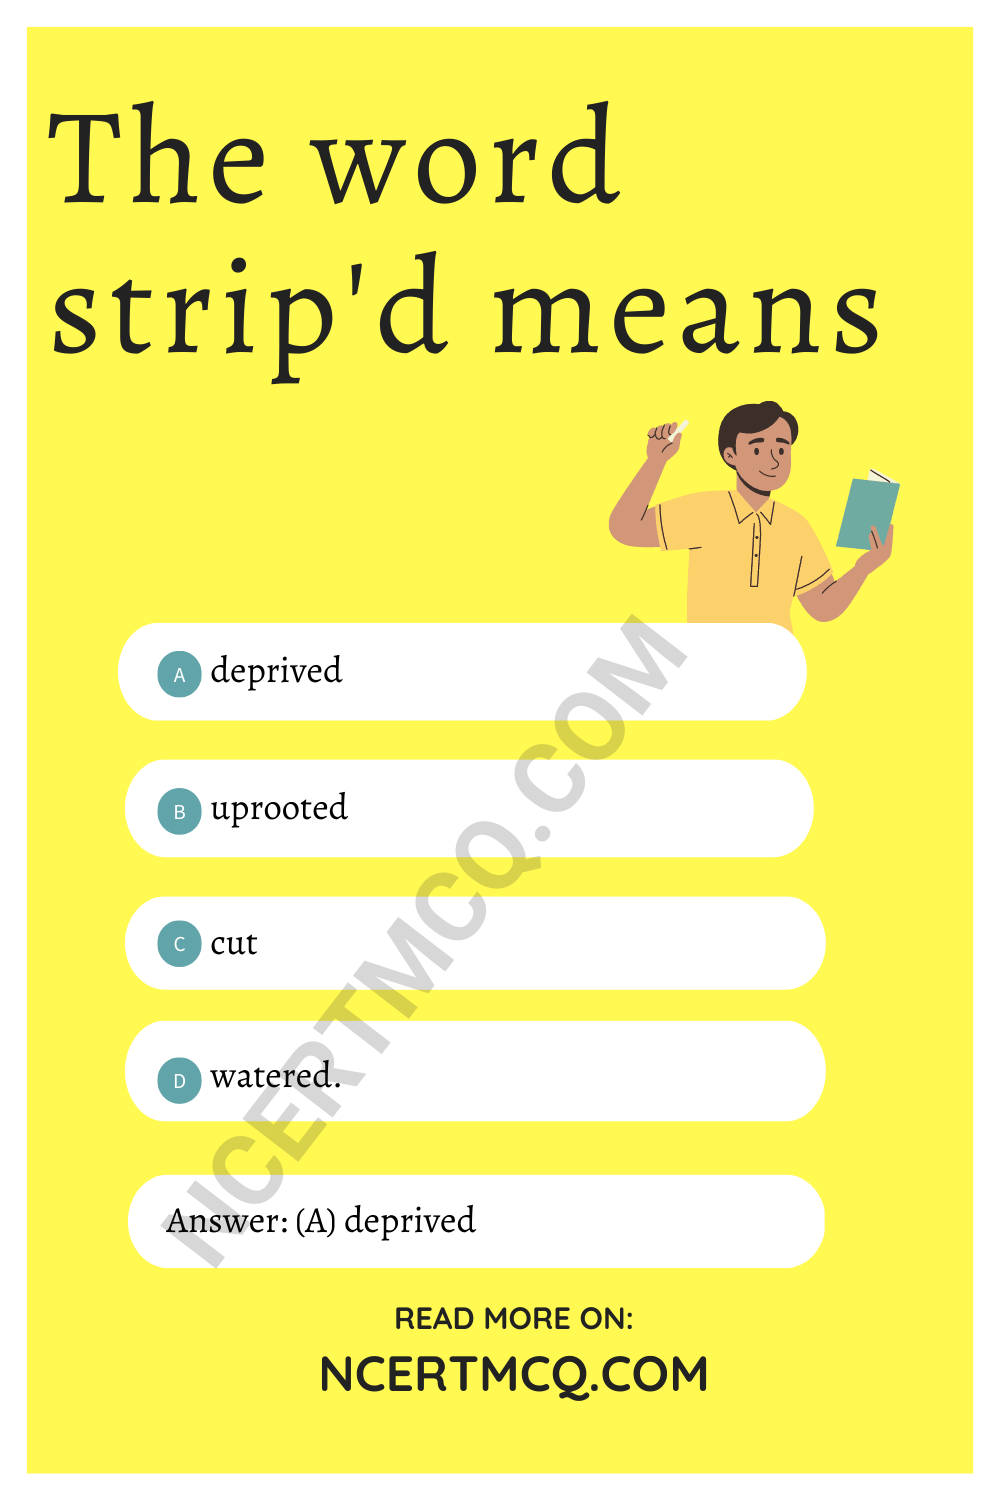 The word strip'd means